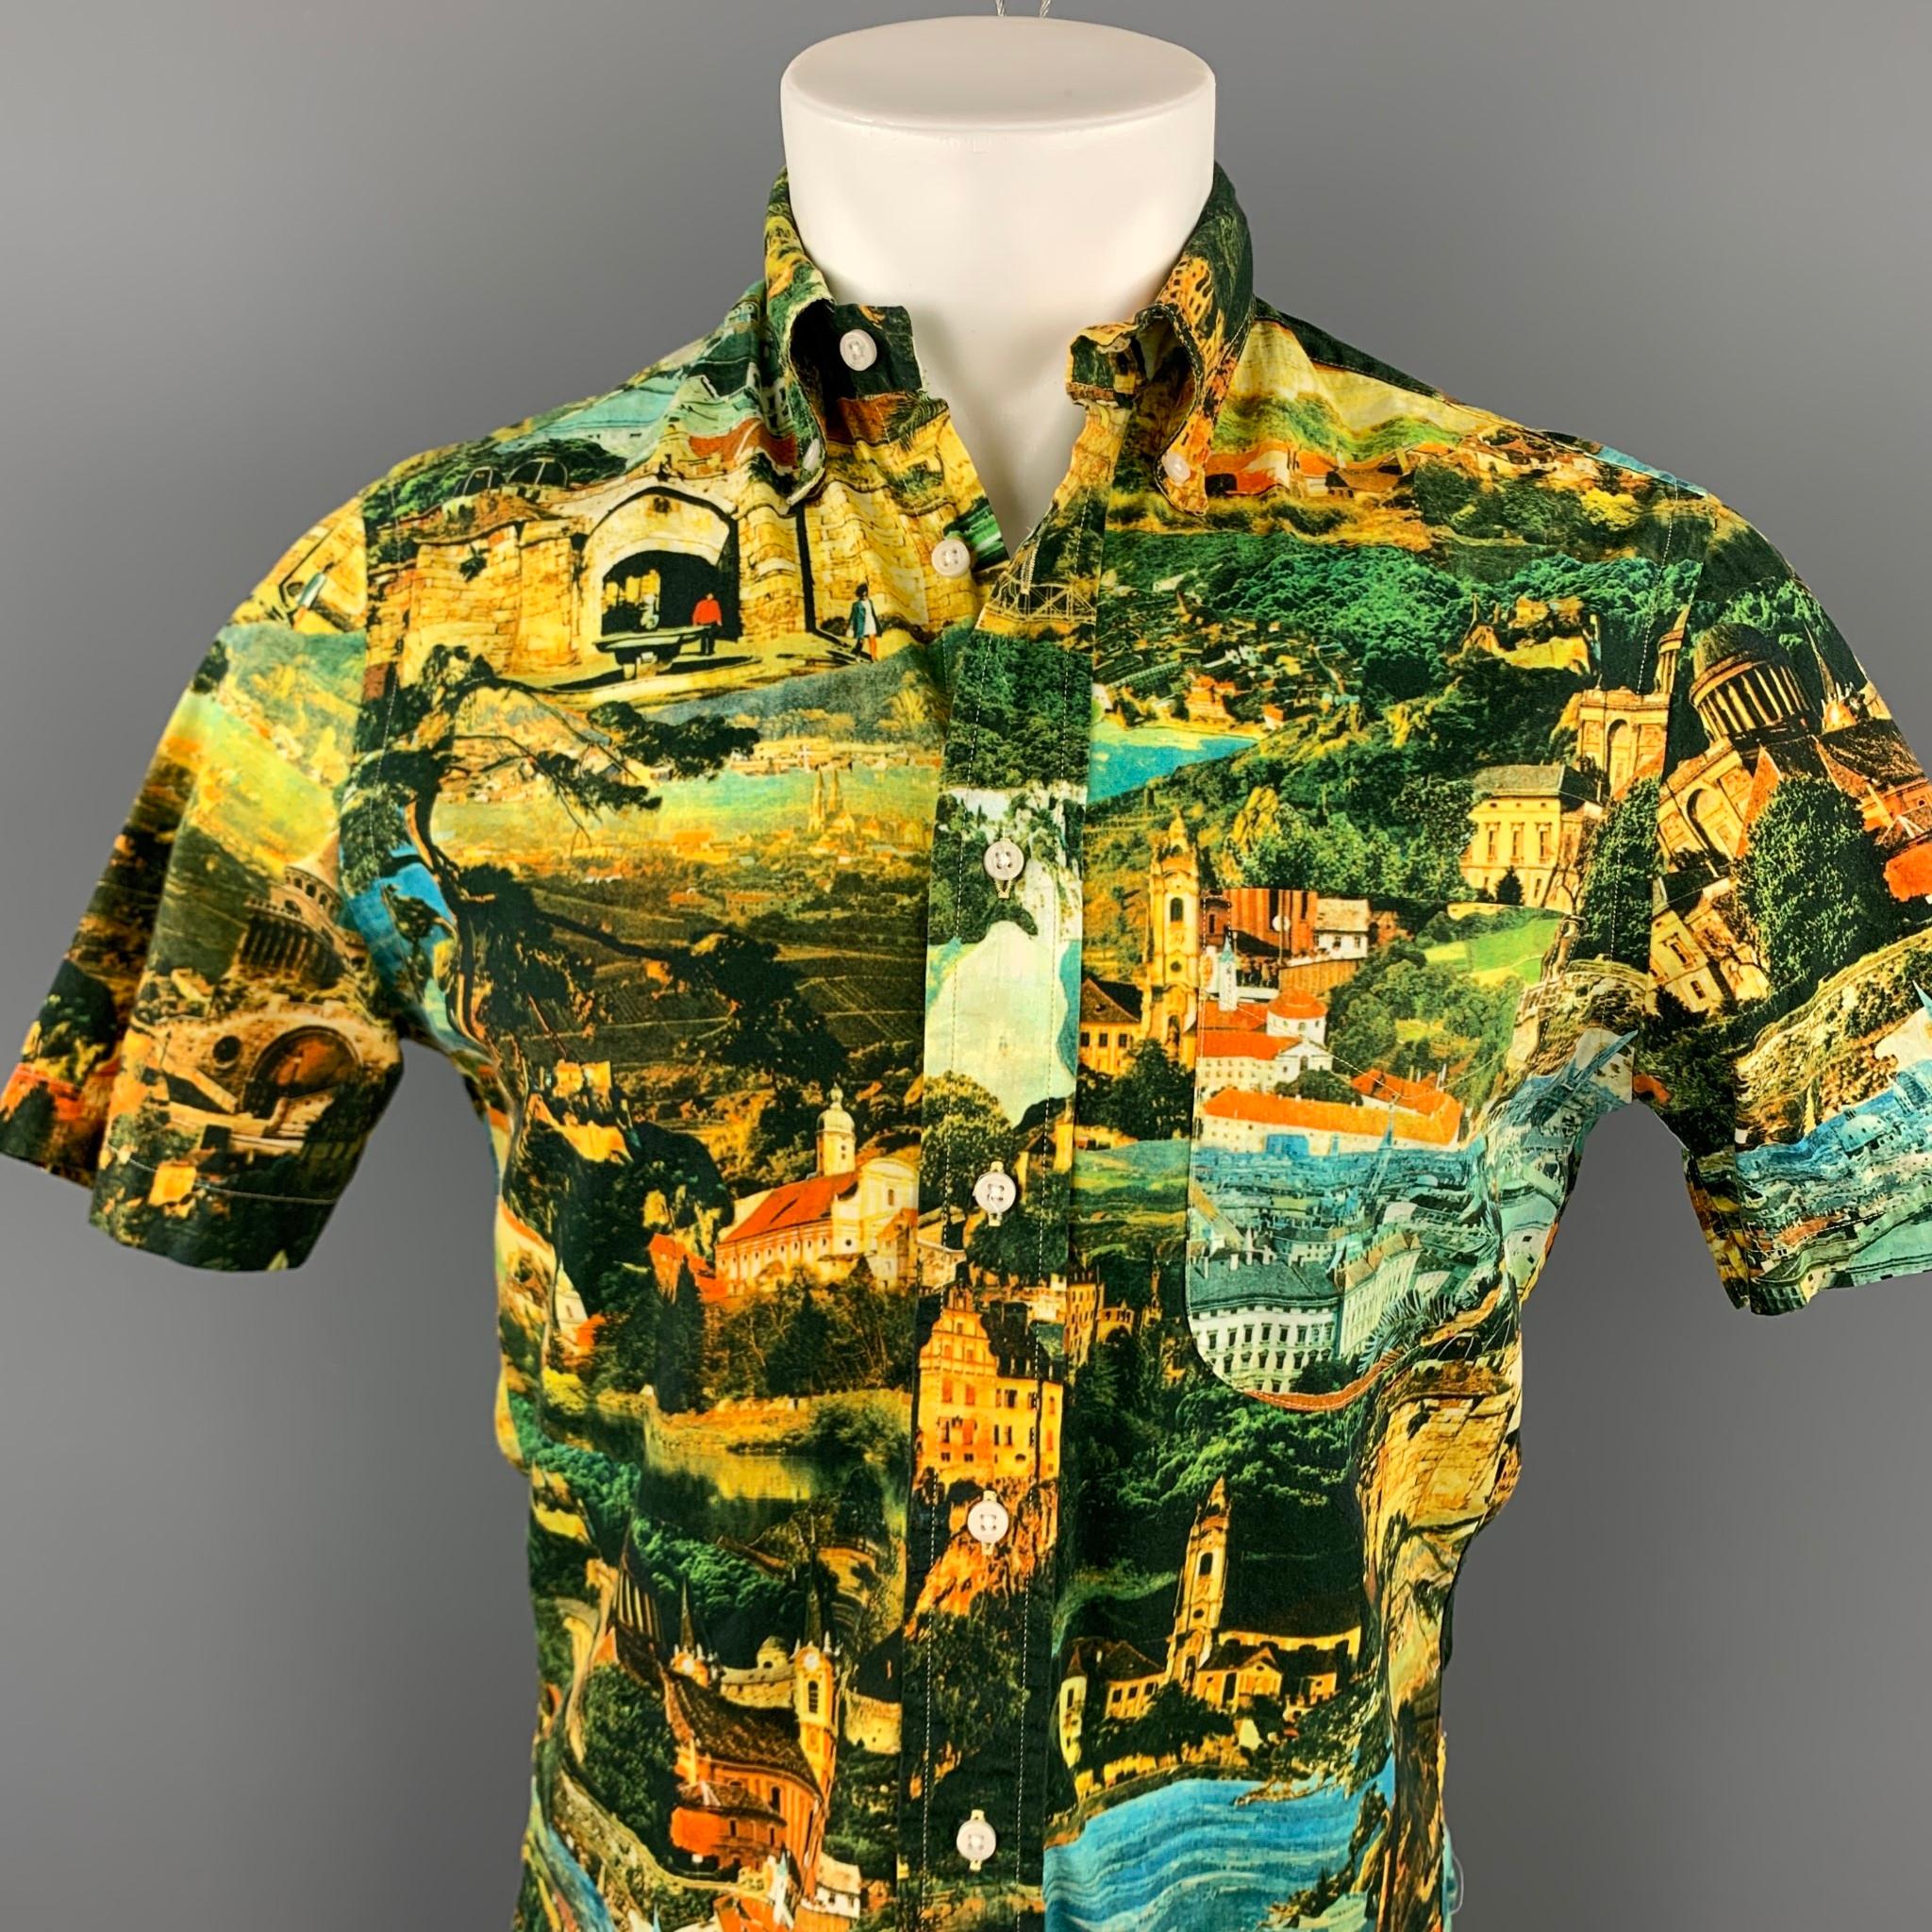 GITMAN VINTAGE short sleeve shirt comes in a multi-color print cotton featuring a button down style and a front pocket. Made in USA.

Excellent Pre-Owned Condition.
Marked: S

Measurements:

Shoulder: 17.5 in. 
Chest: 38 in. 
Sleeve: 9.5 in.